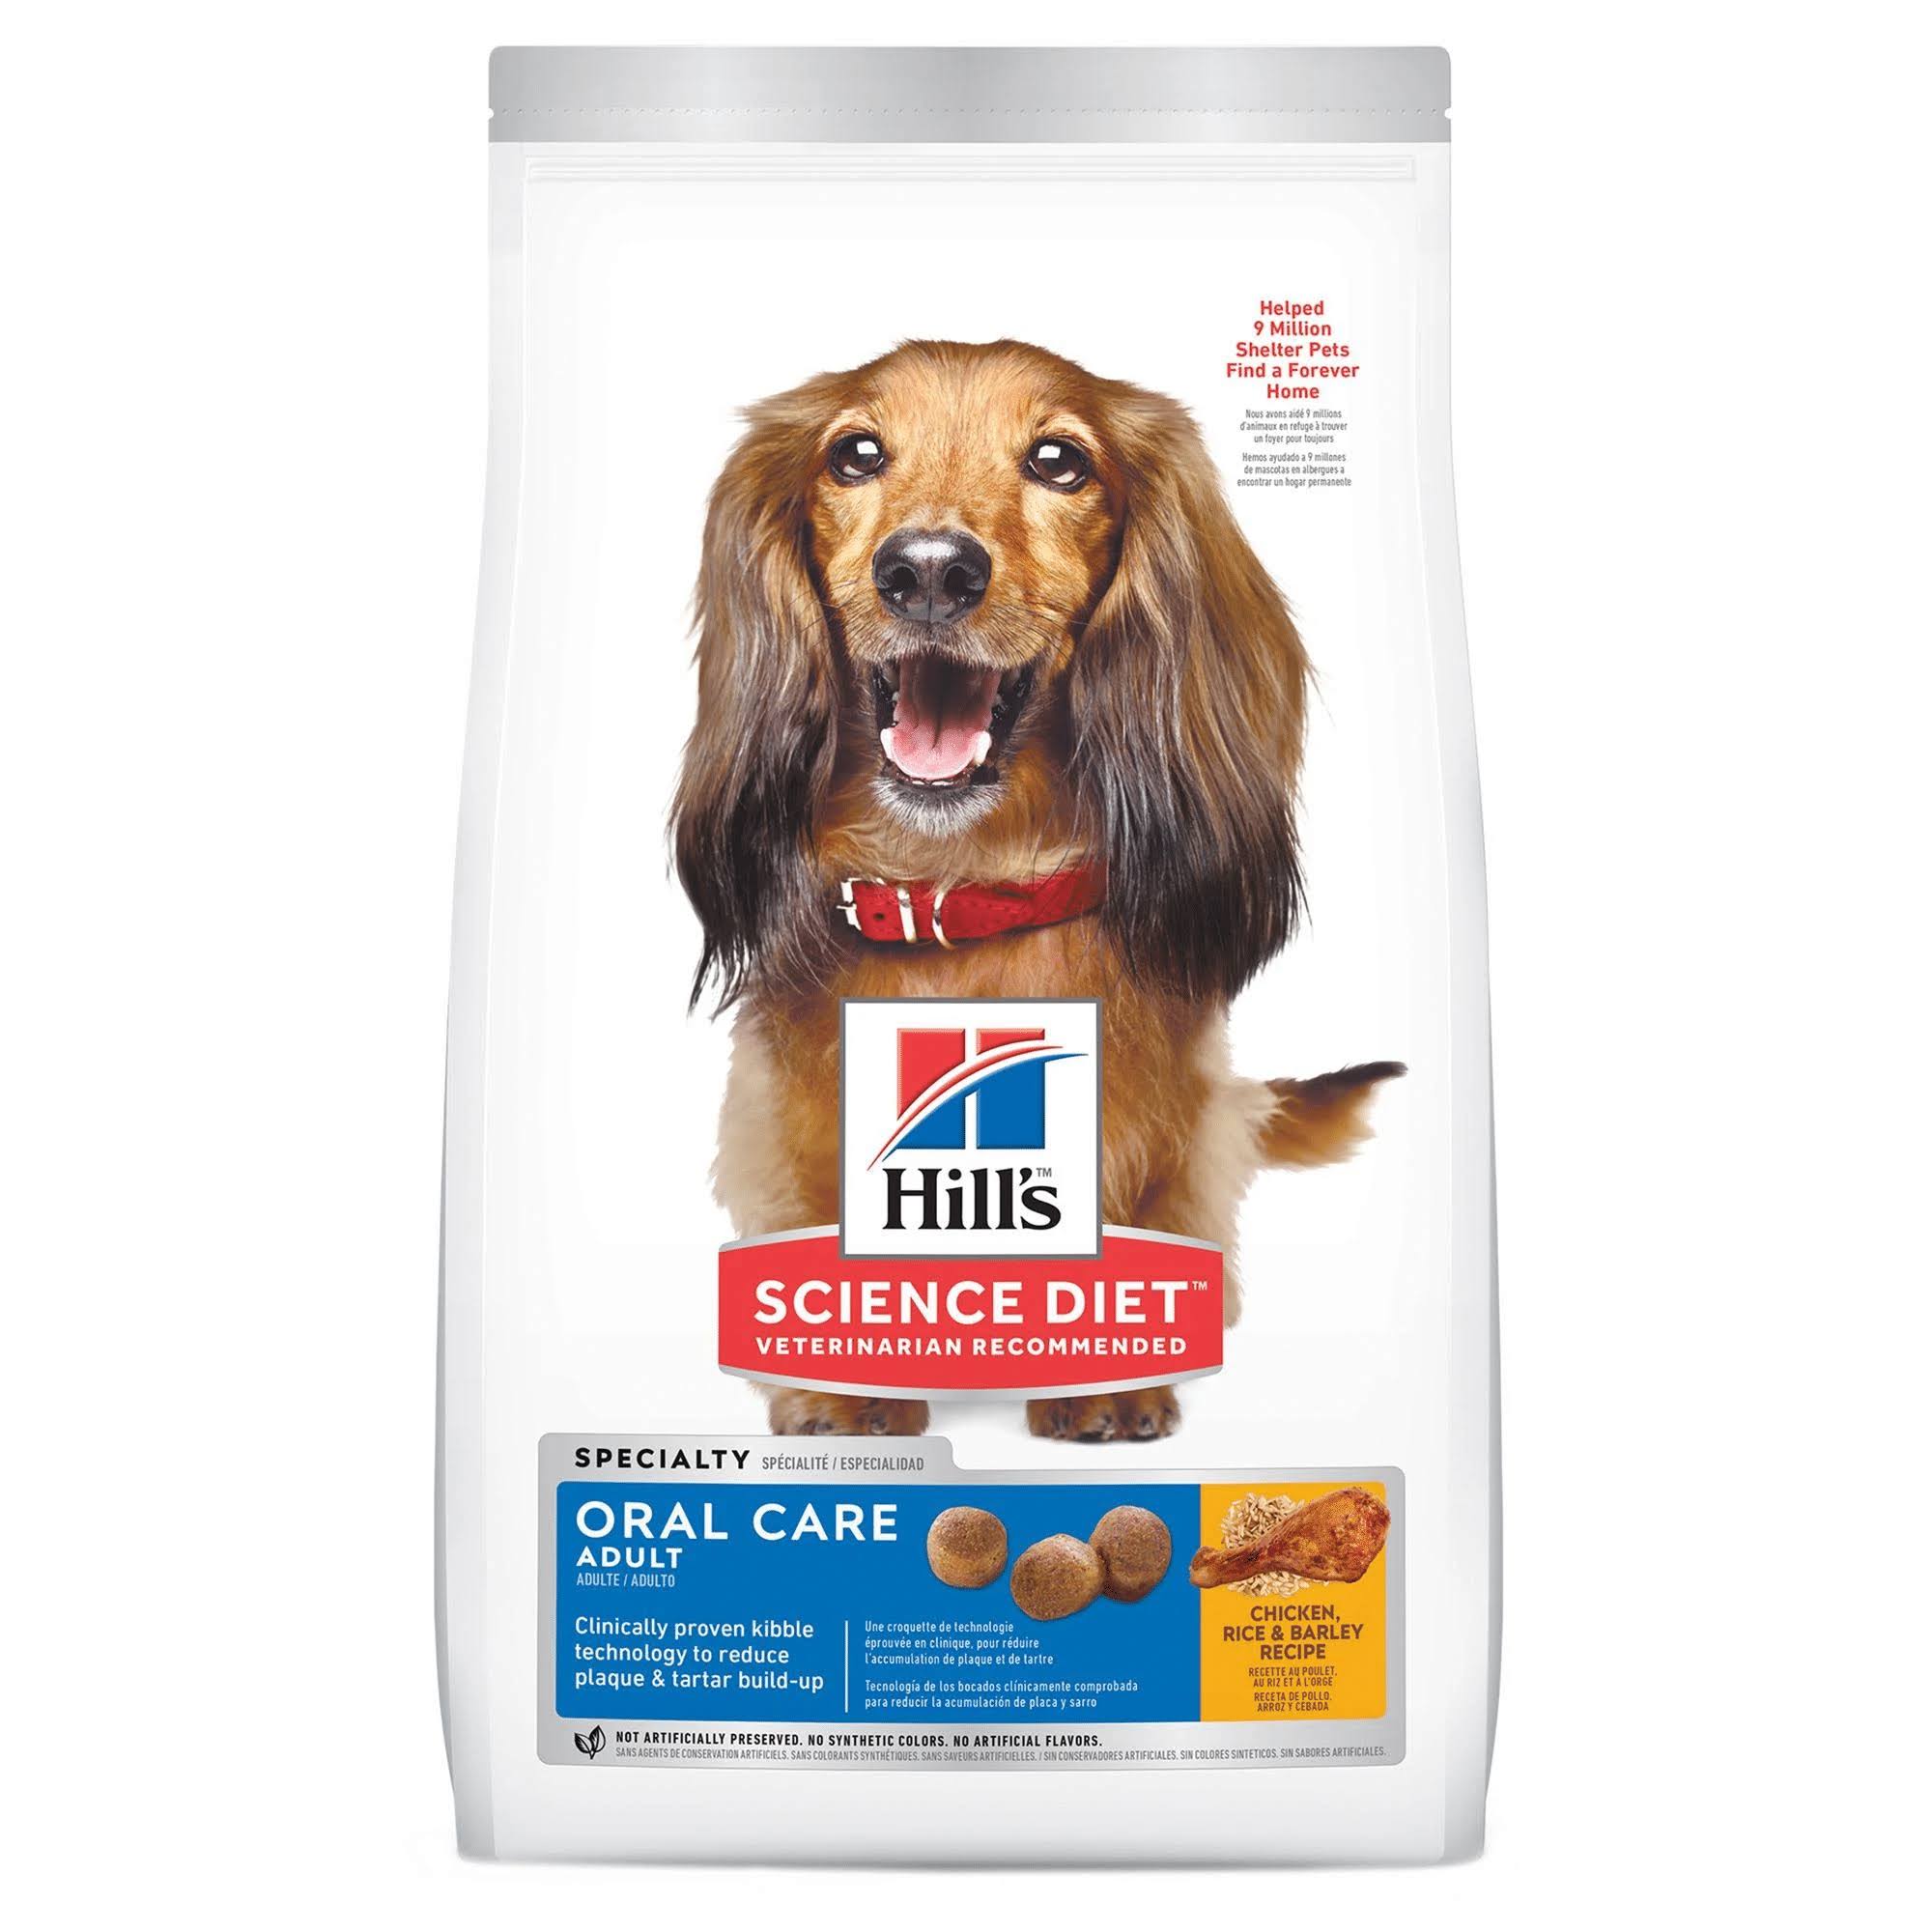 Hill's Science Diet Oral Care Adult Chicken, Rice & Barley Recipe Dry Dog Food - 28.5lb